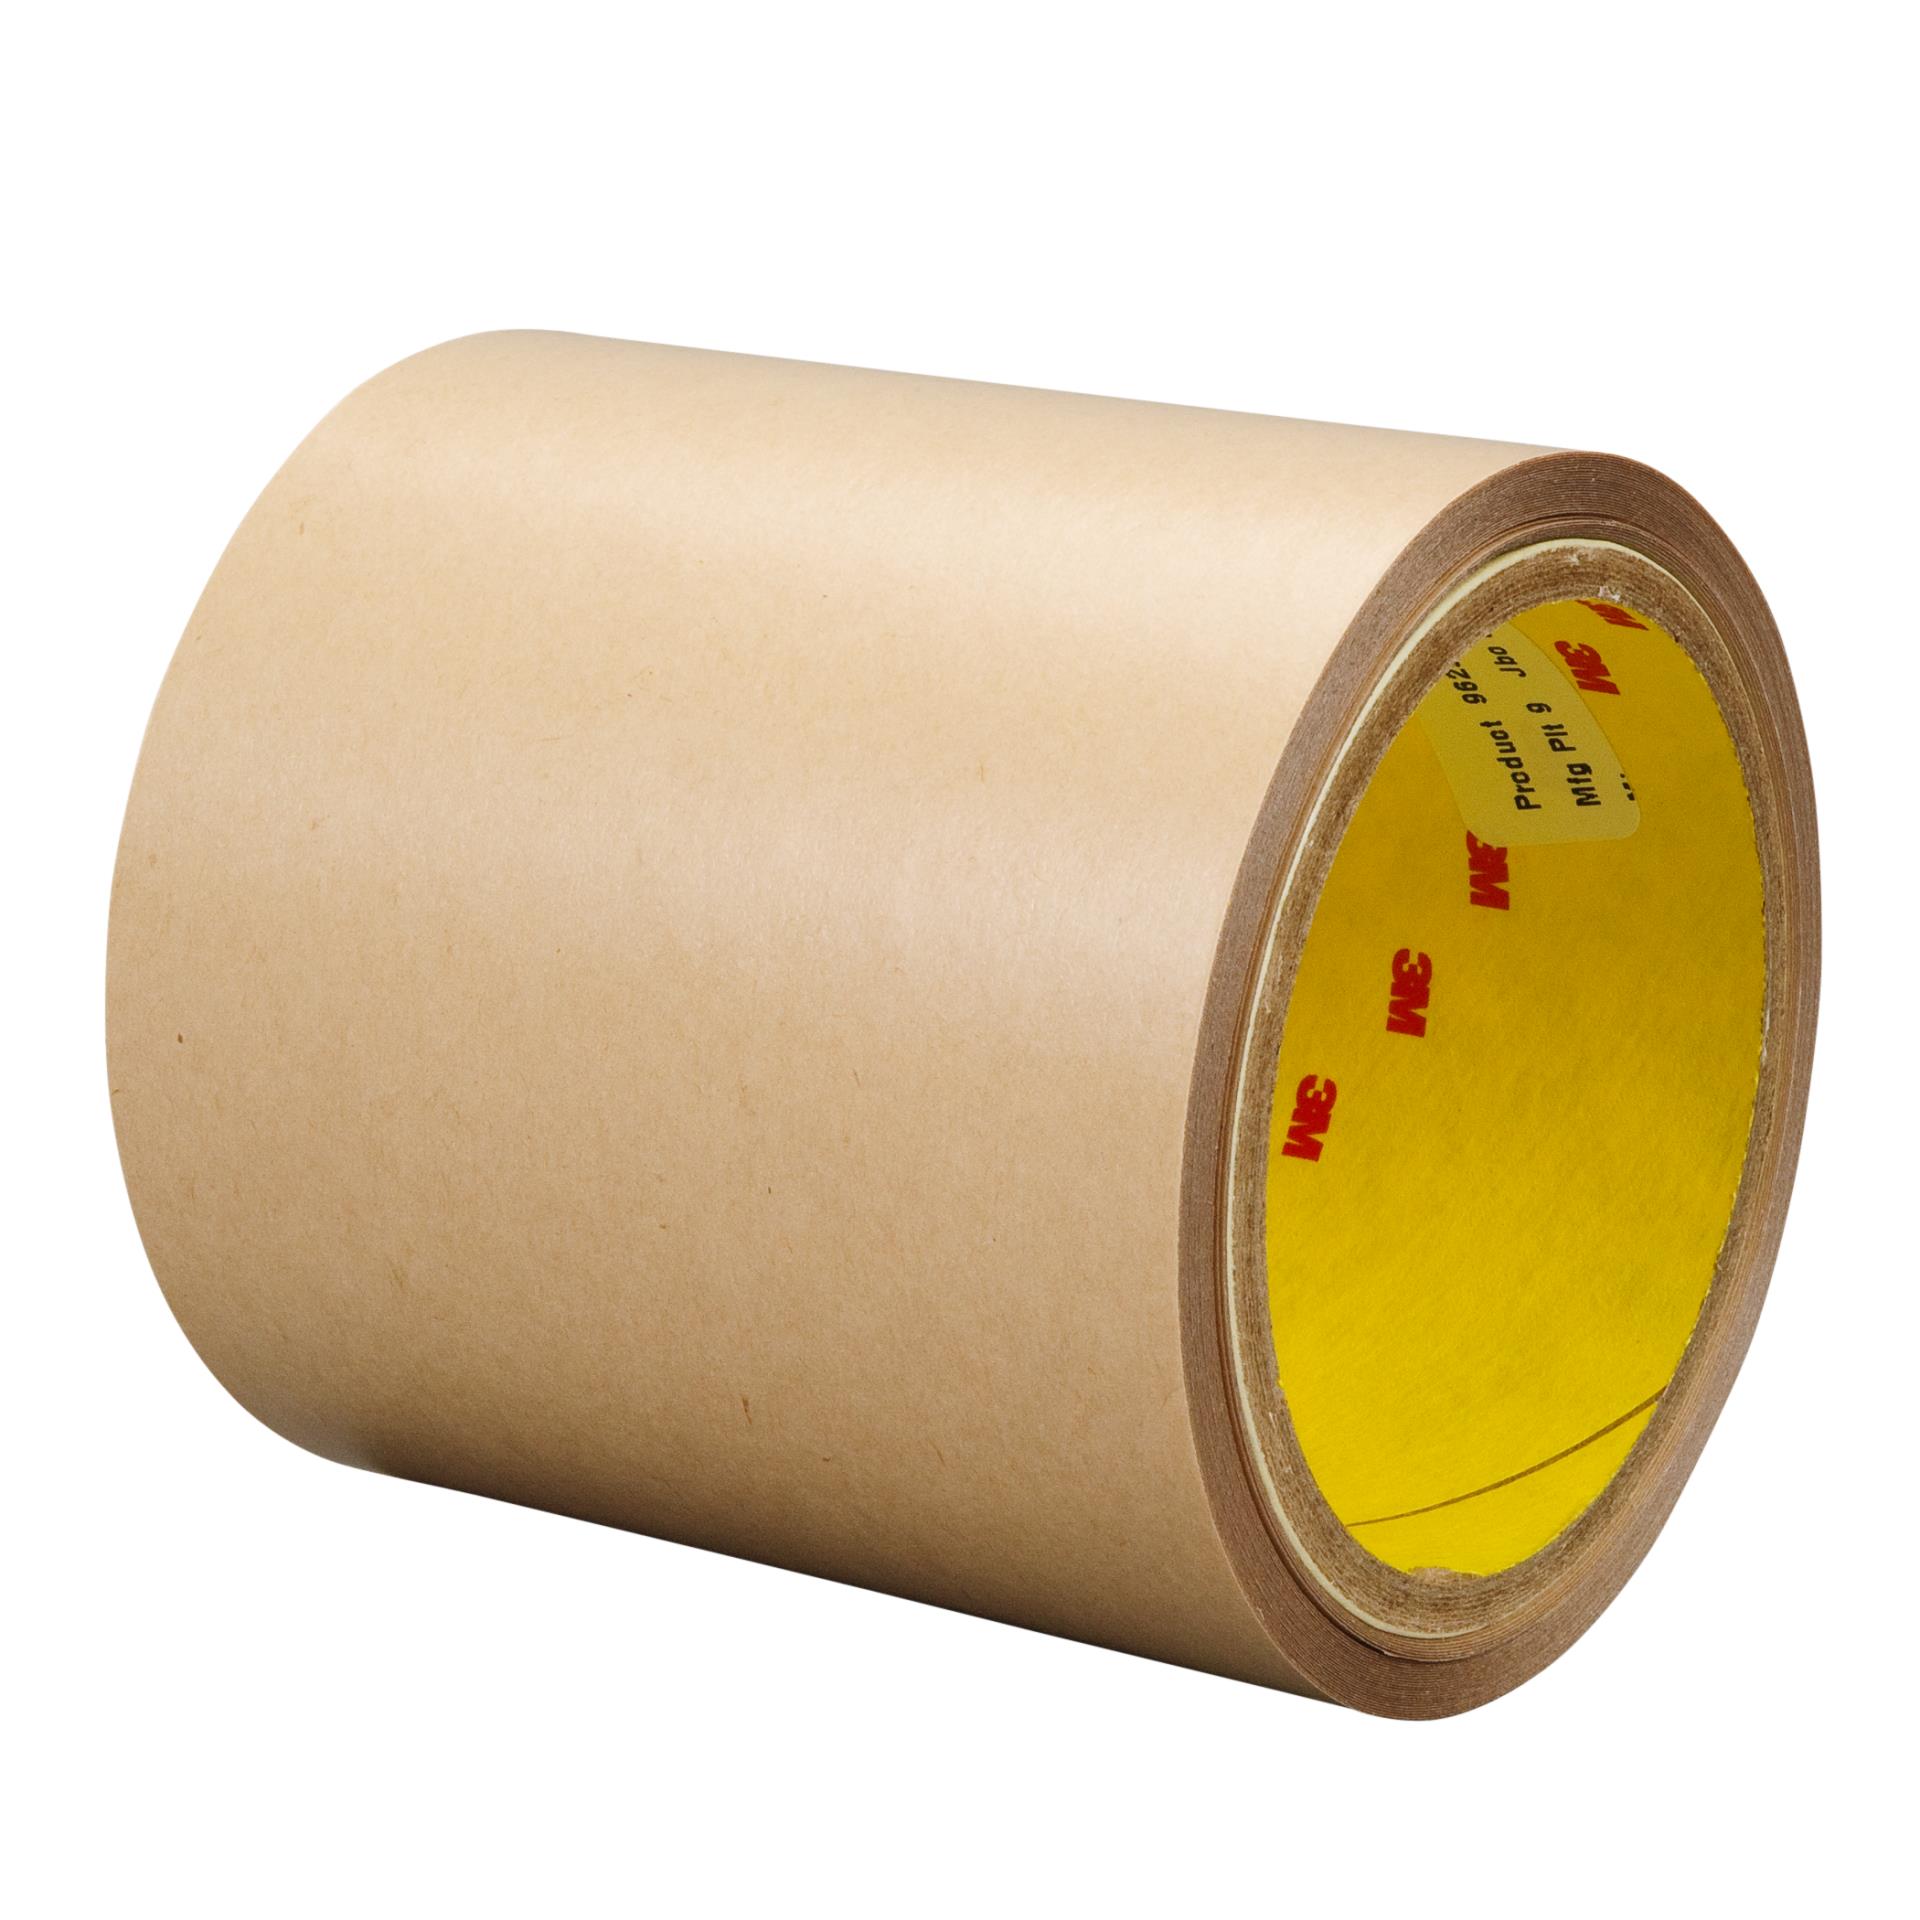 https://www.e-aircraftsupply.com/ItemImages/10/7010335510_3M_Double_Coated_Tape_9629PC_Clear.jpg